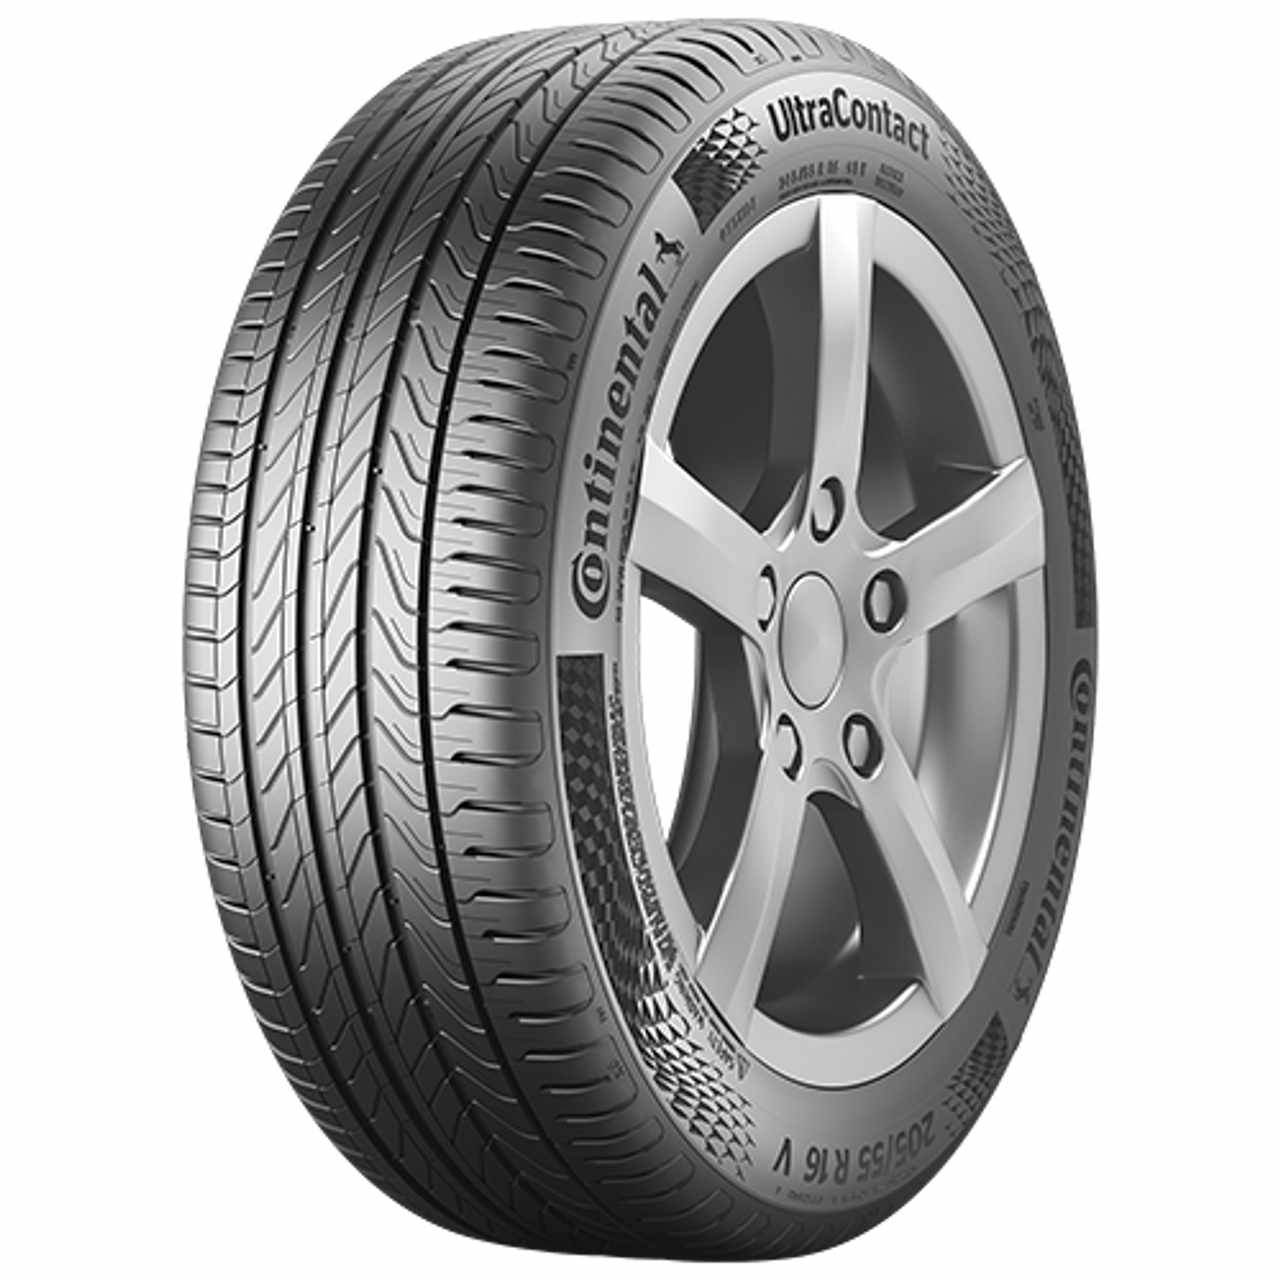 CONTINENTAL ULTRACONTACT (EVc) 185/65R15 88T BSW